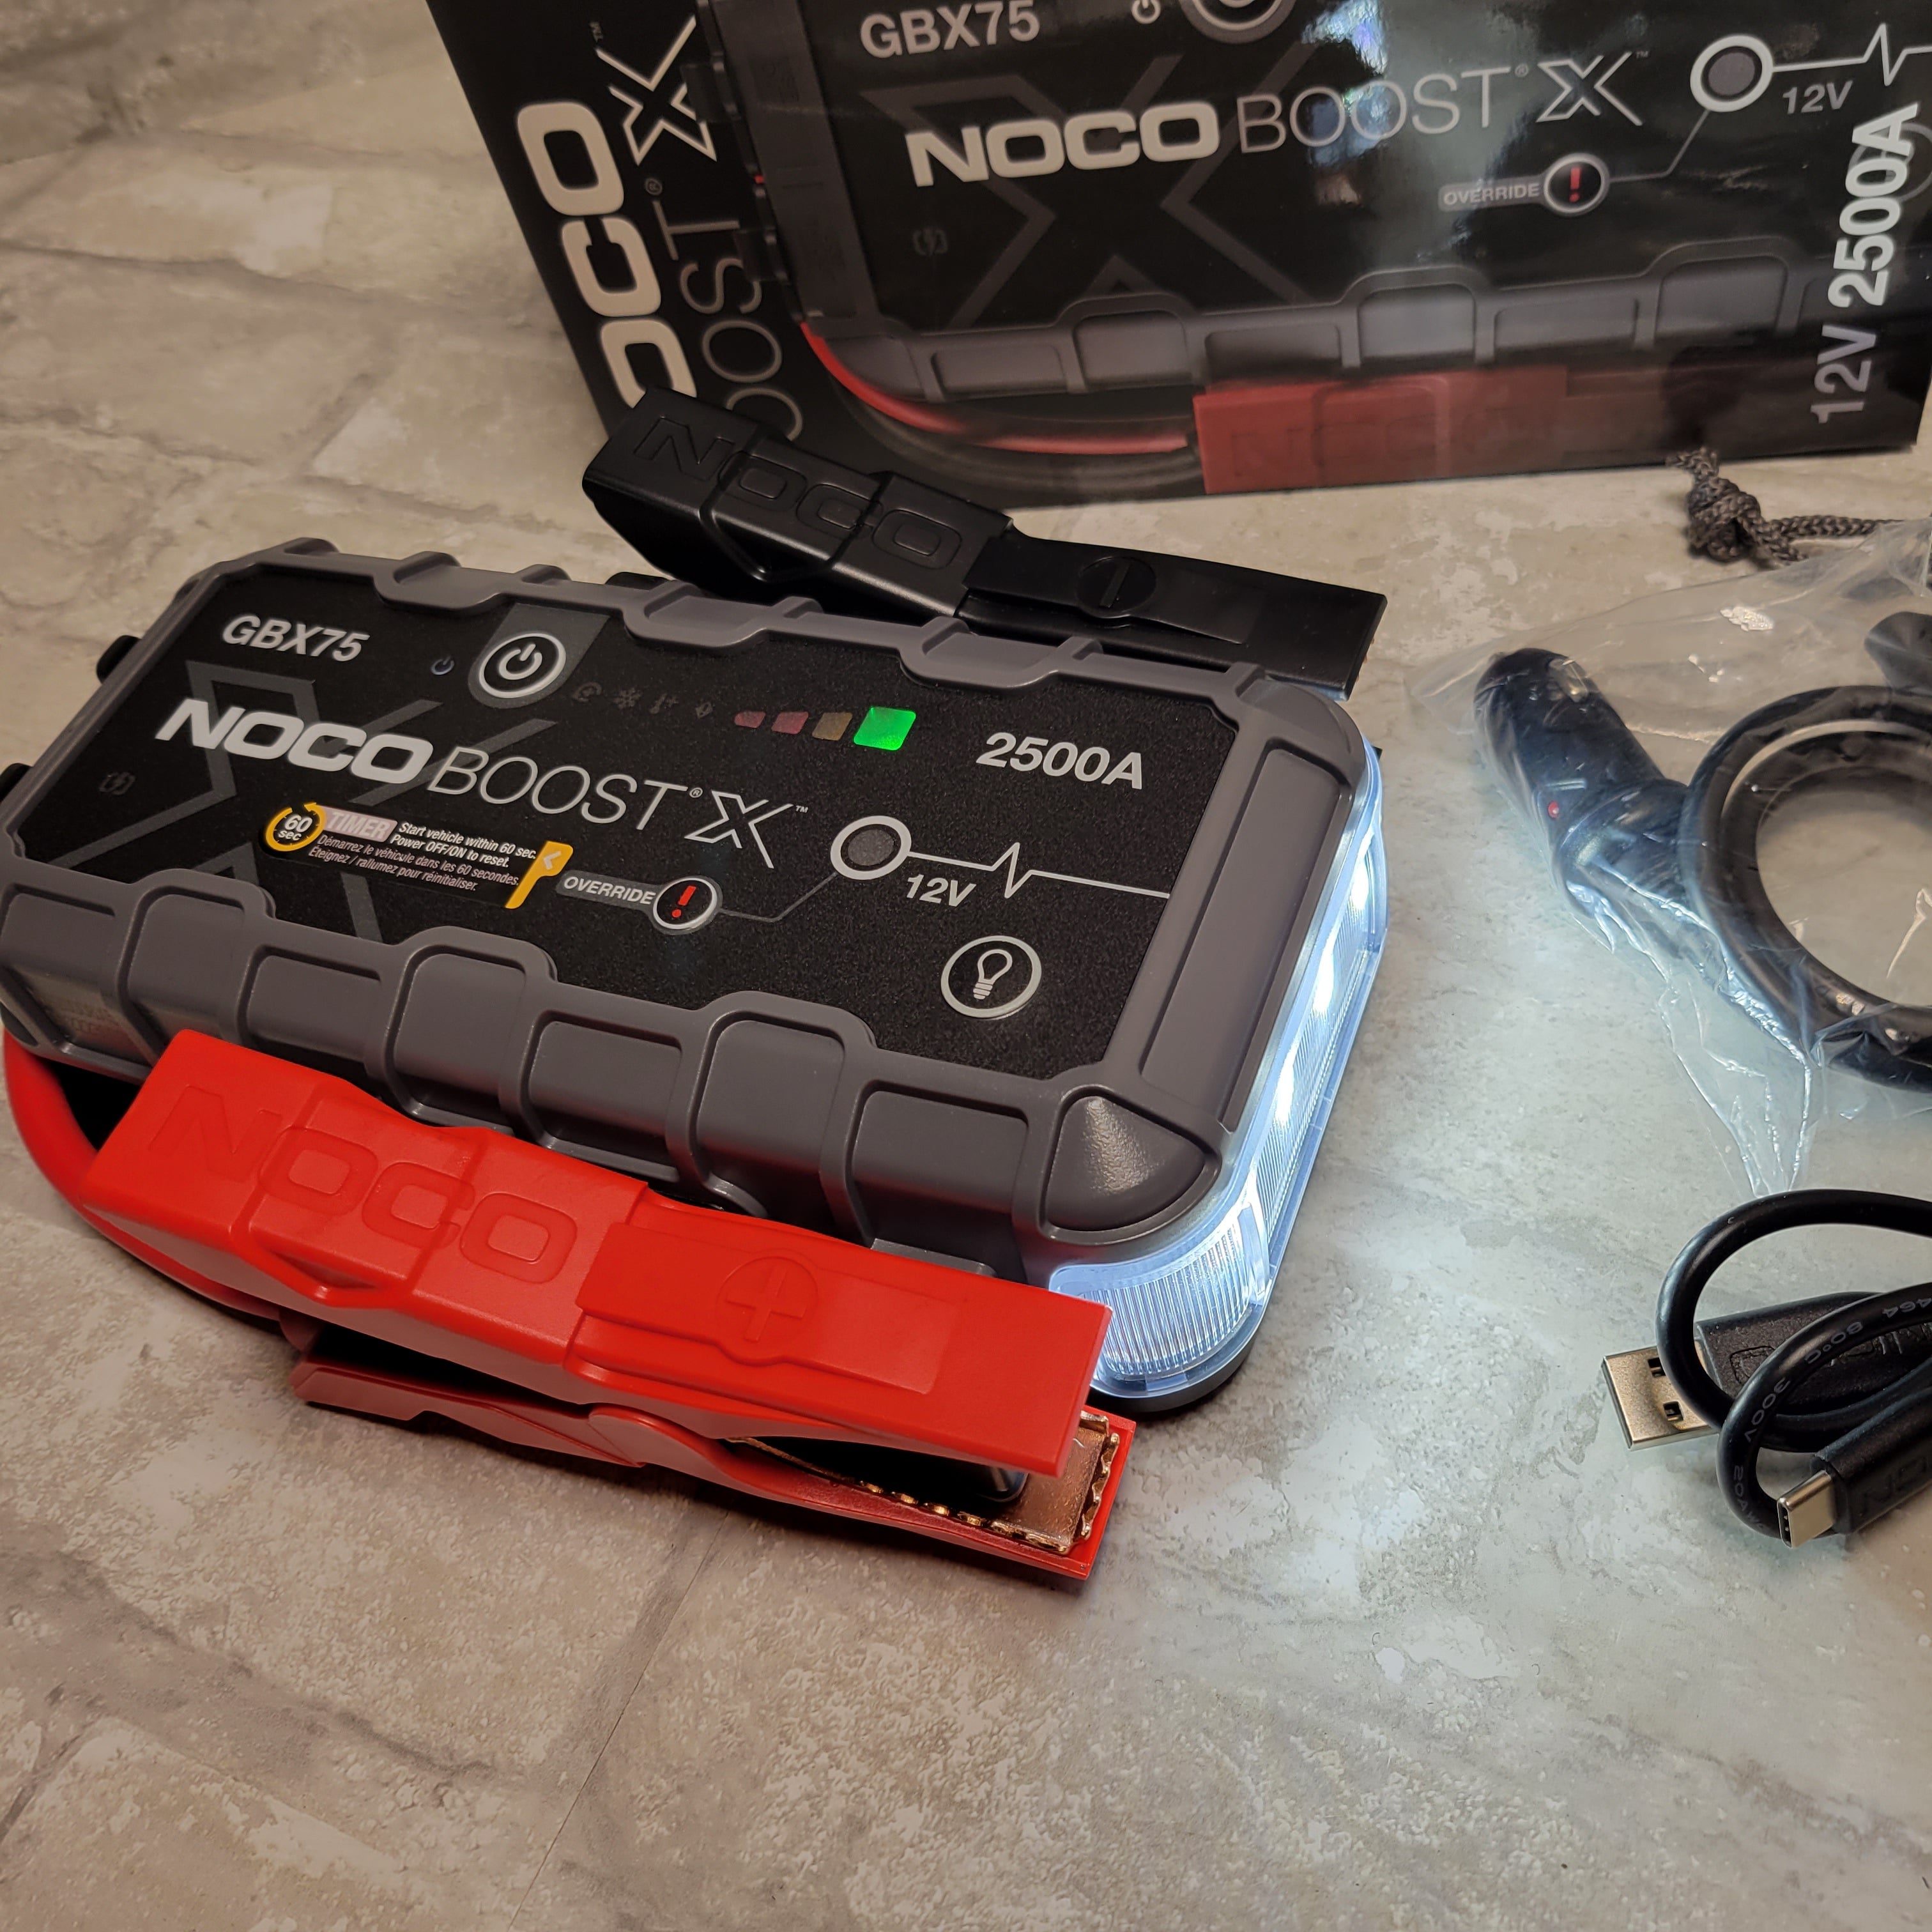 NOCO Boost X GBX75 2500A 12V UltraSafe Portable Lithium Jump Starter (8045141557486)